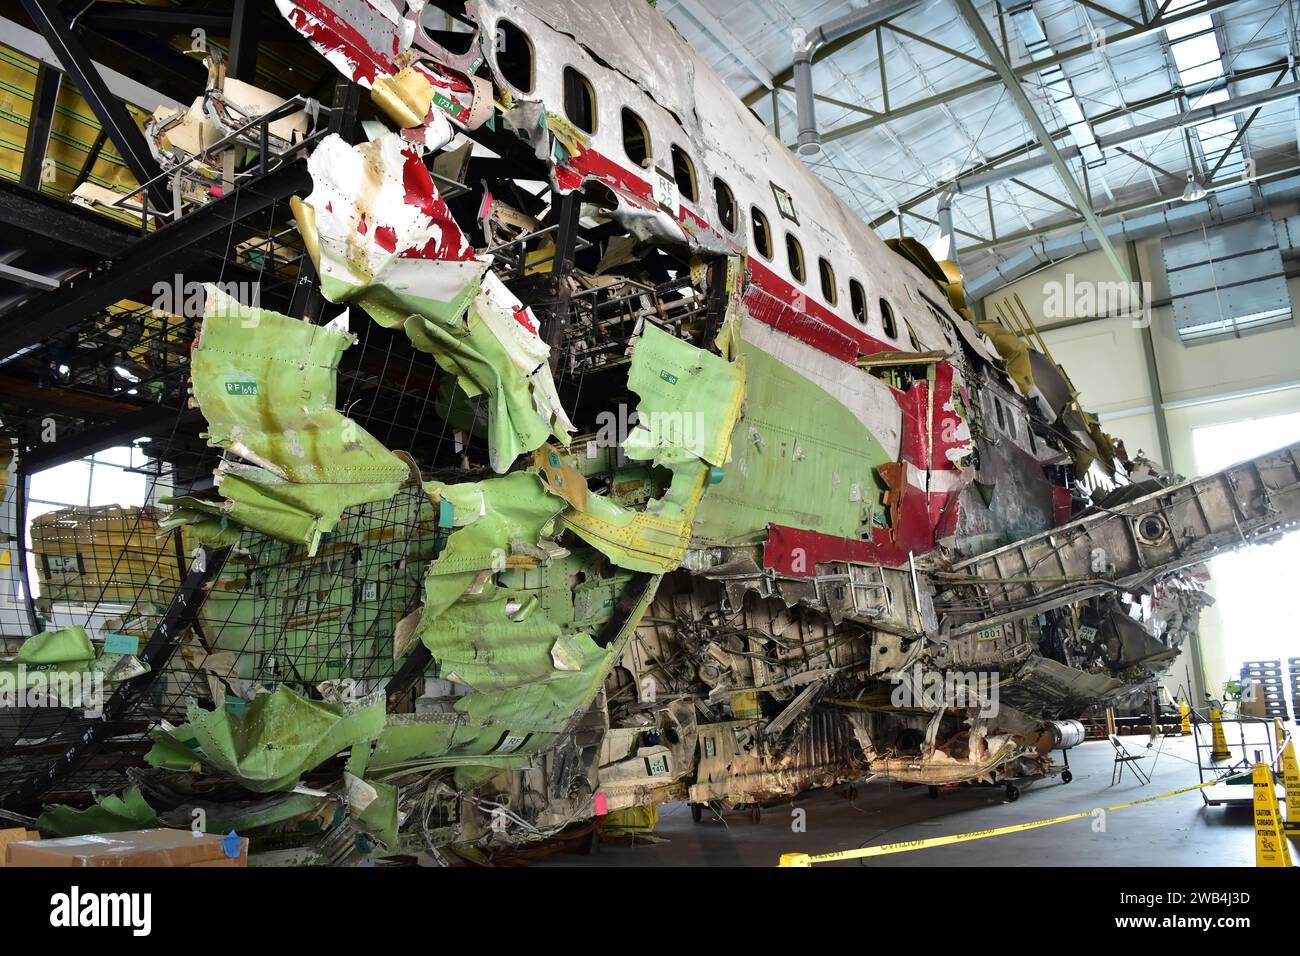 The U.S. National Transportation Safety Board reconstructs the wreckage of TWA Flight 800 at a hangar in Virginia. On July 17, 1996, about 2031 eastern daylight time, Trans World Airlines, Inc. (TWA) flight 800, a Boeing 747-131, N93119, crashed in the Atlantic Ocean near East Moriches, New York. TWA flight 800 was operating under the provisions of 14 Code of Federal Regulations Part 121 as a scheduled international passenger flight from John F. Kennedy International Airport (JFK), New York, New York, to Charles DeGaulle International Airport, Paris, France. Stock Photo